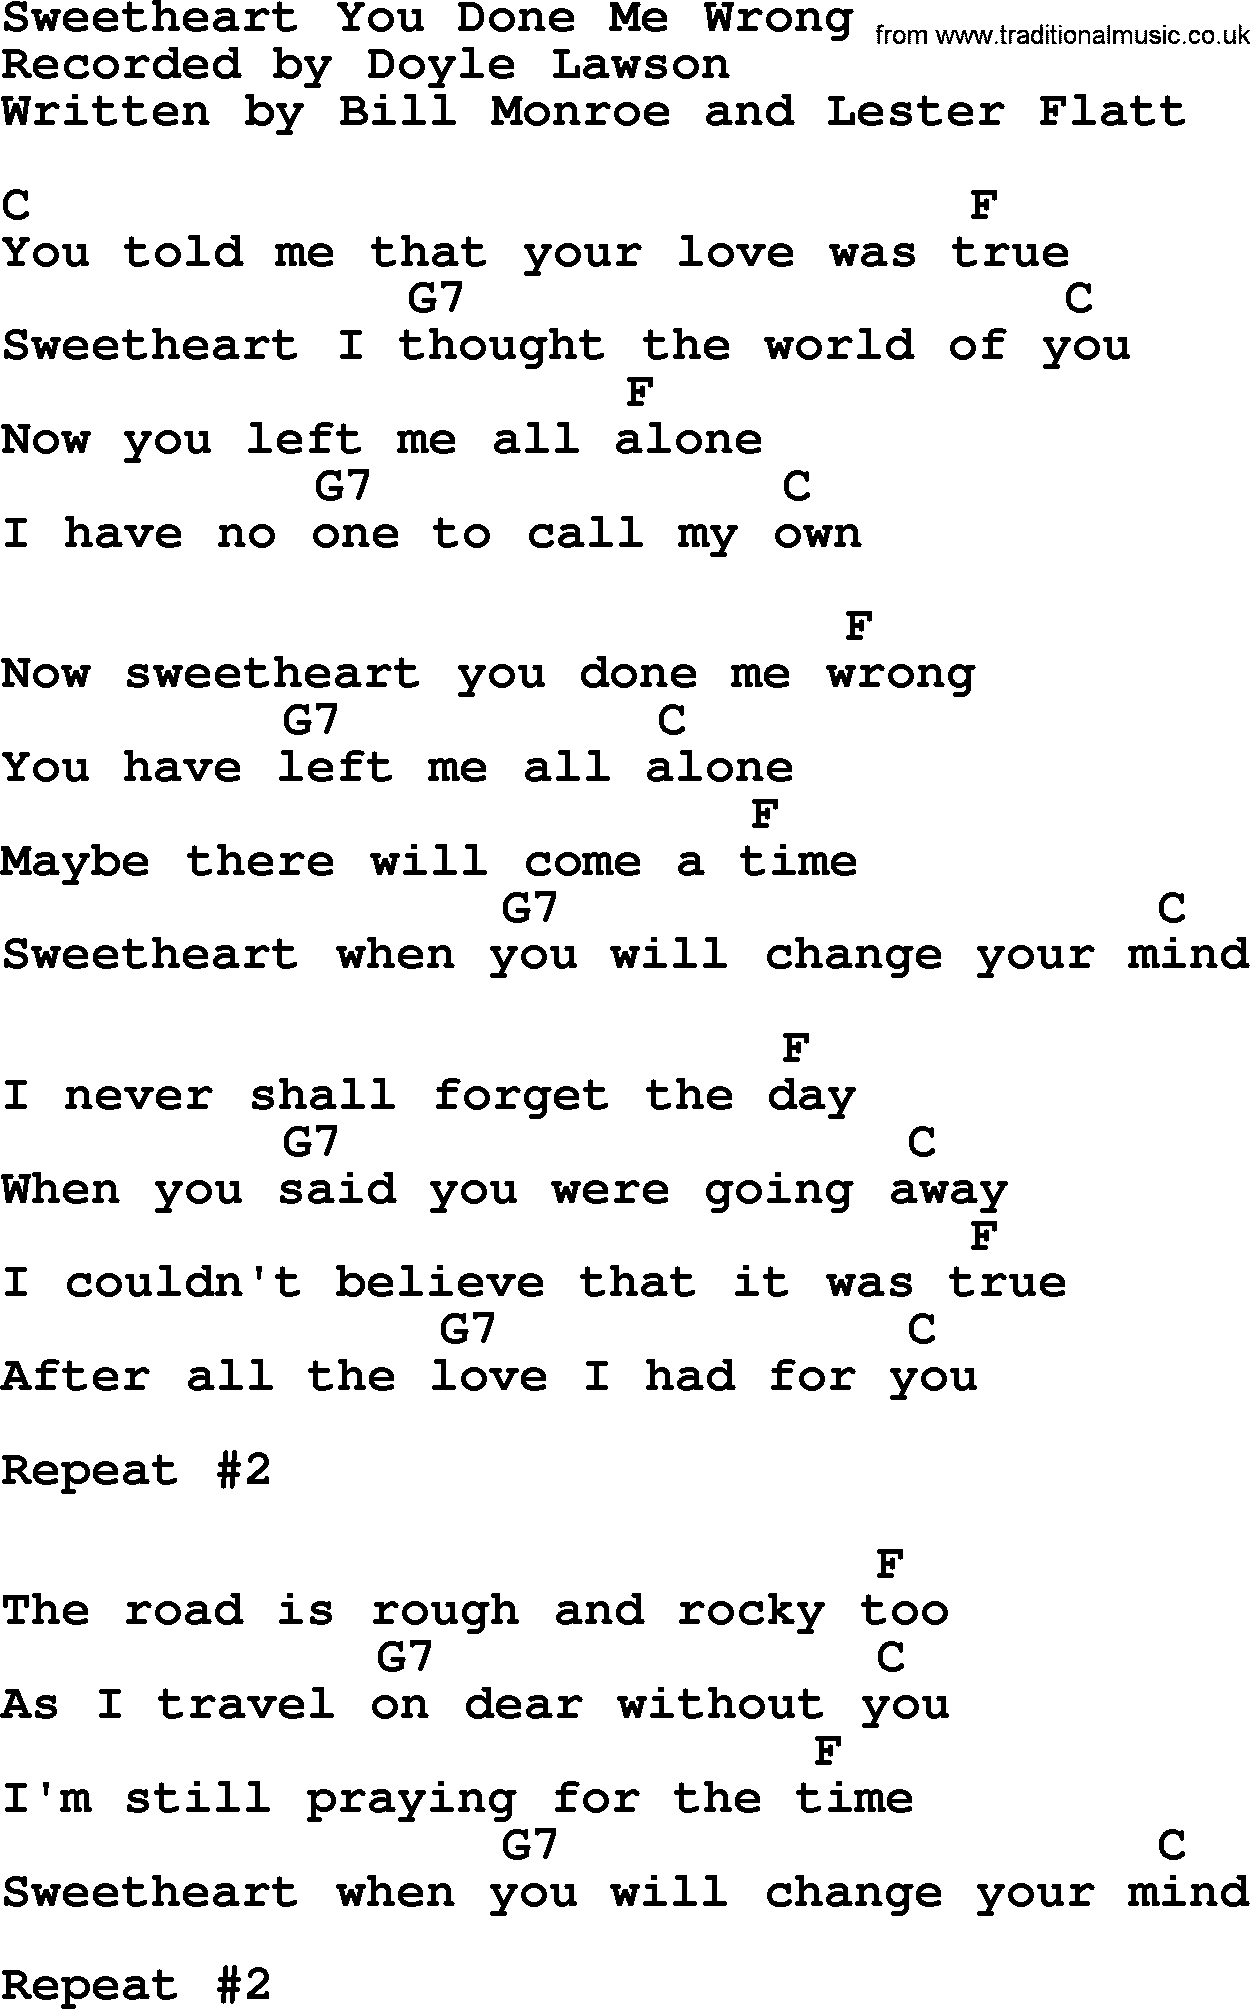 Bluegrass song: Sweetheart You Done Me Wrong, lyrics and chords